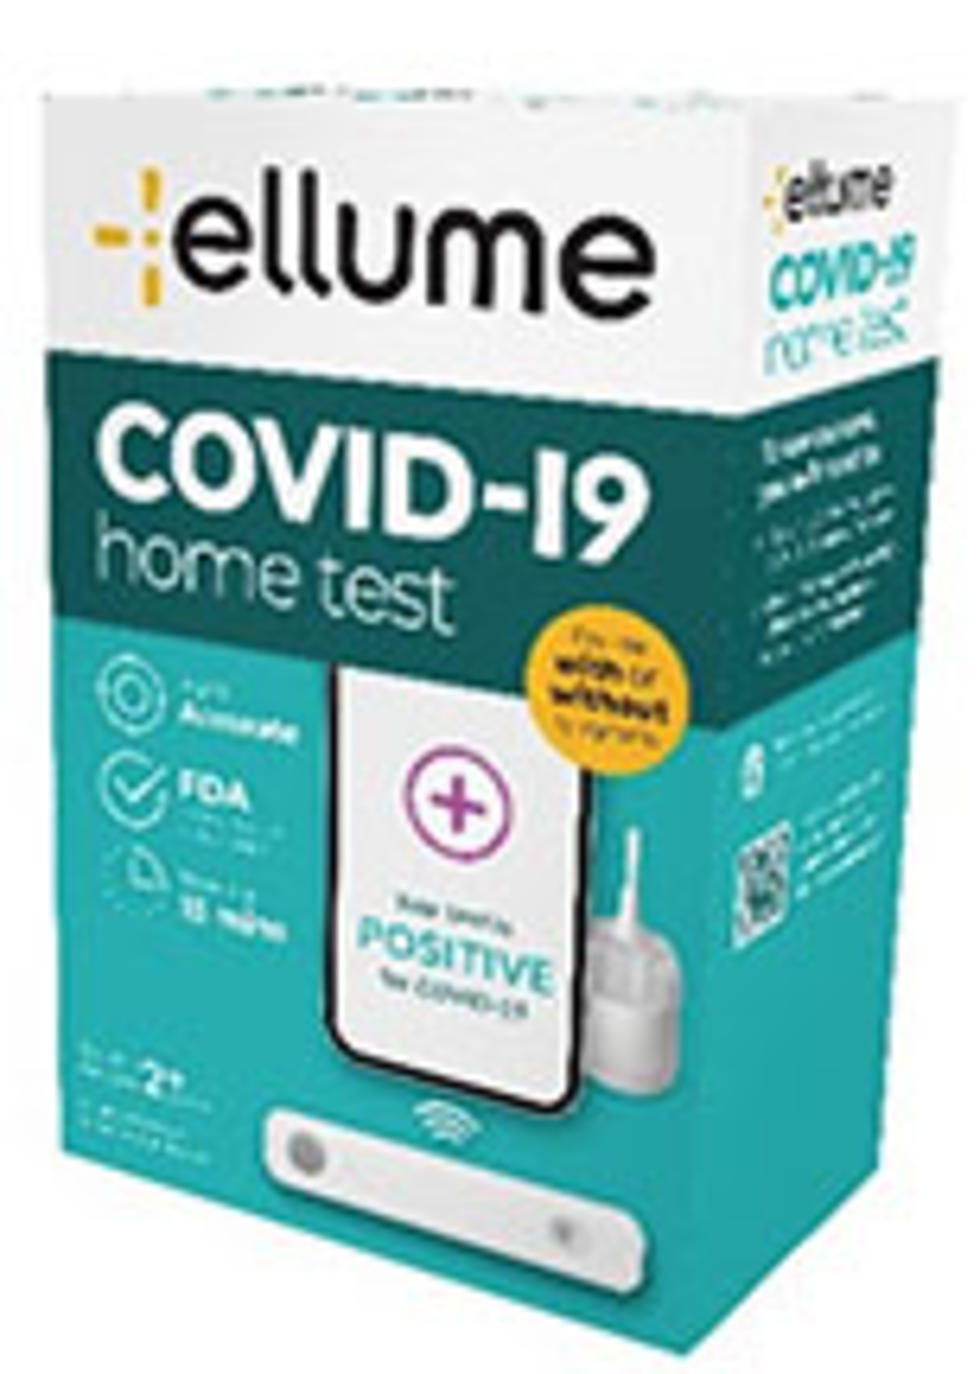 Ellume Issues “Serious” Recall Of 2 Million Plus Home COVID Tests